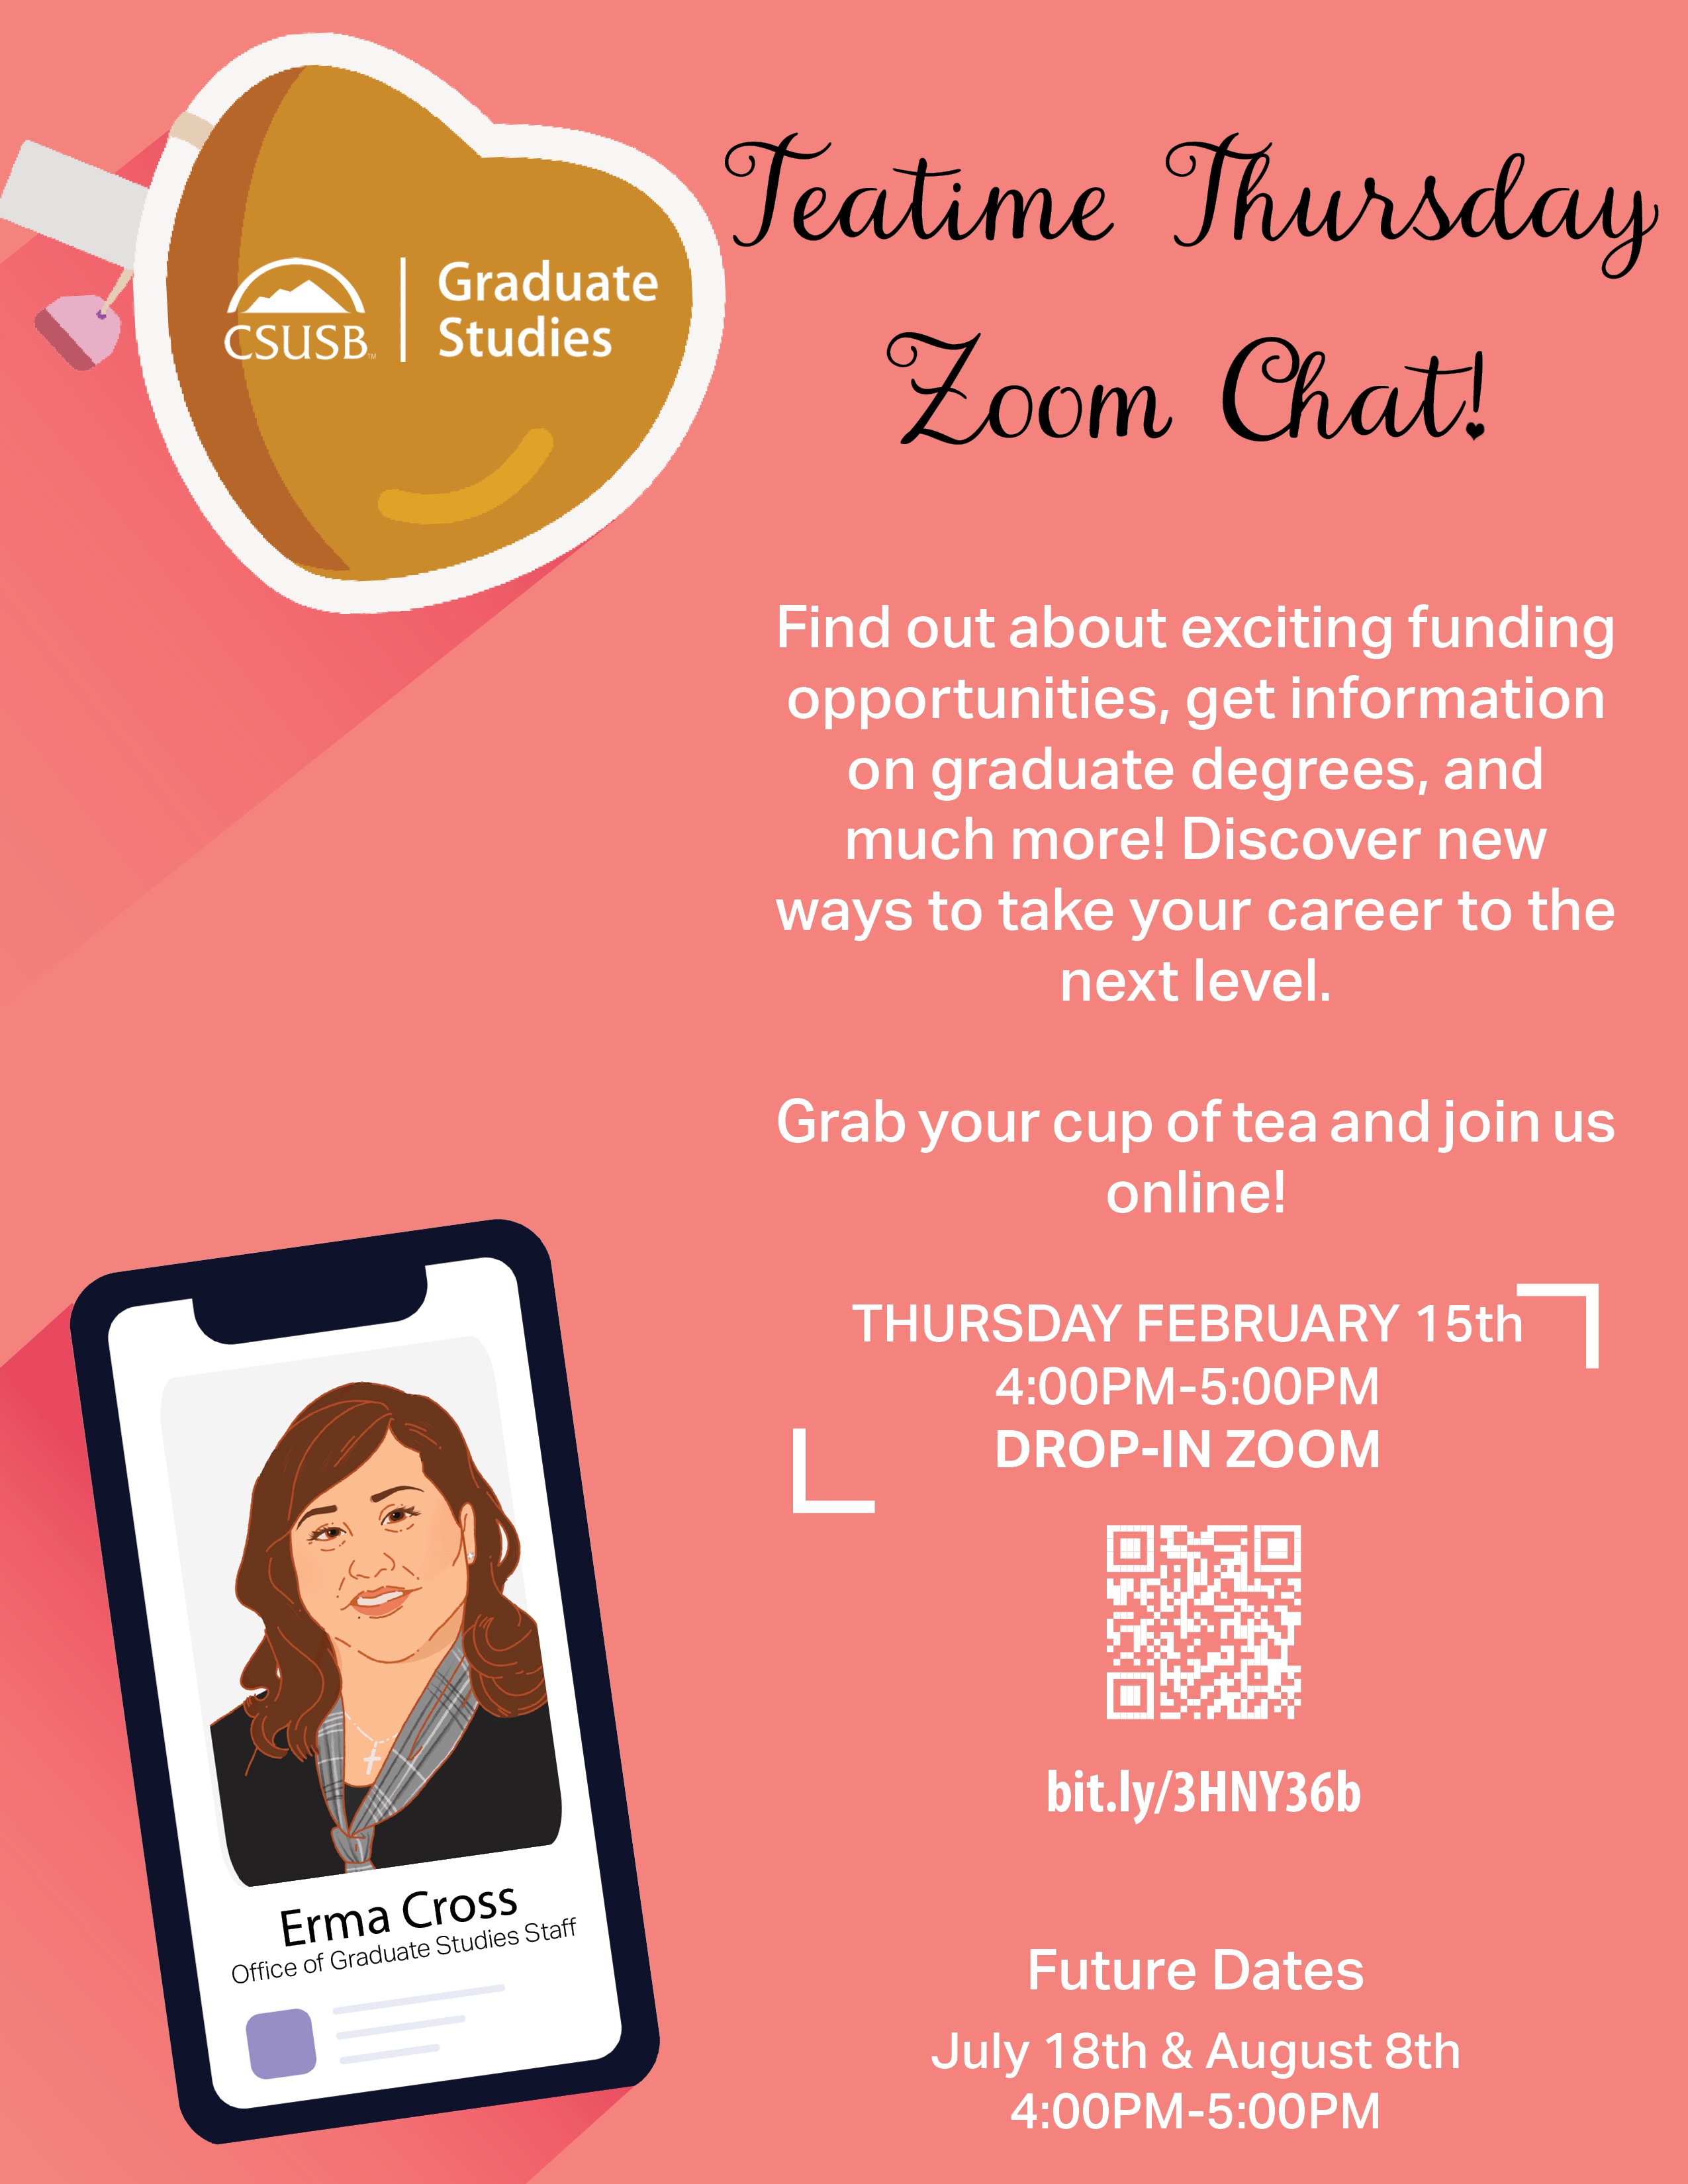 Join the Teatime Thursday Zoom Chat hosted by the Office of Graduate Studies!